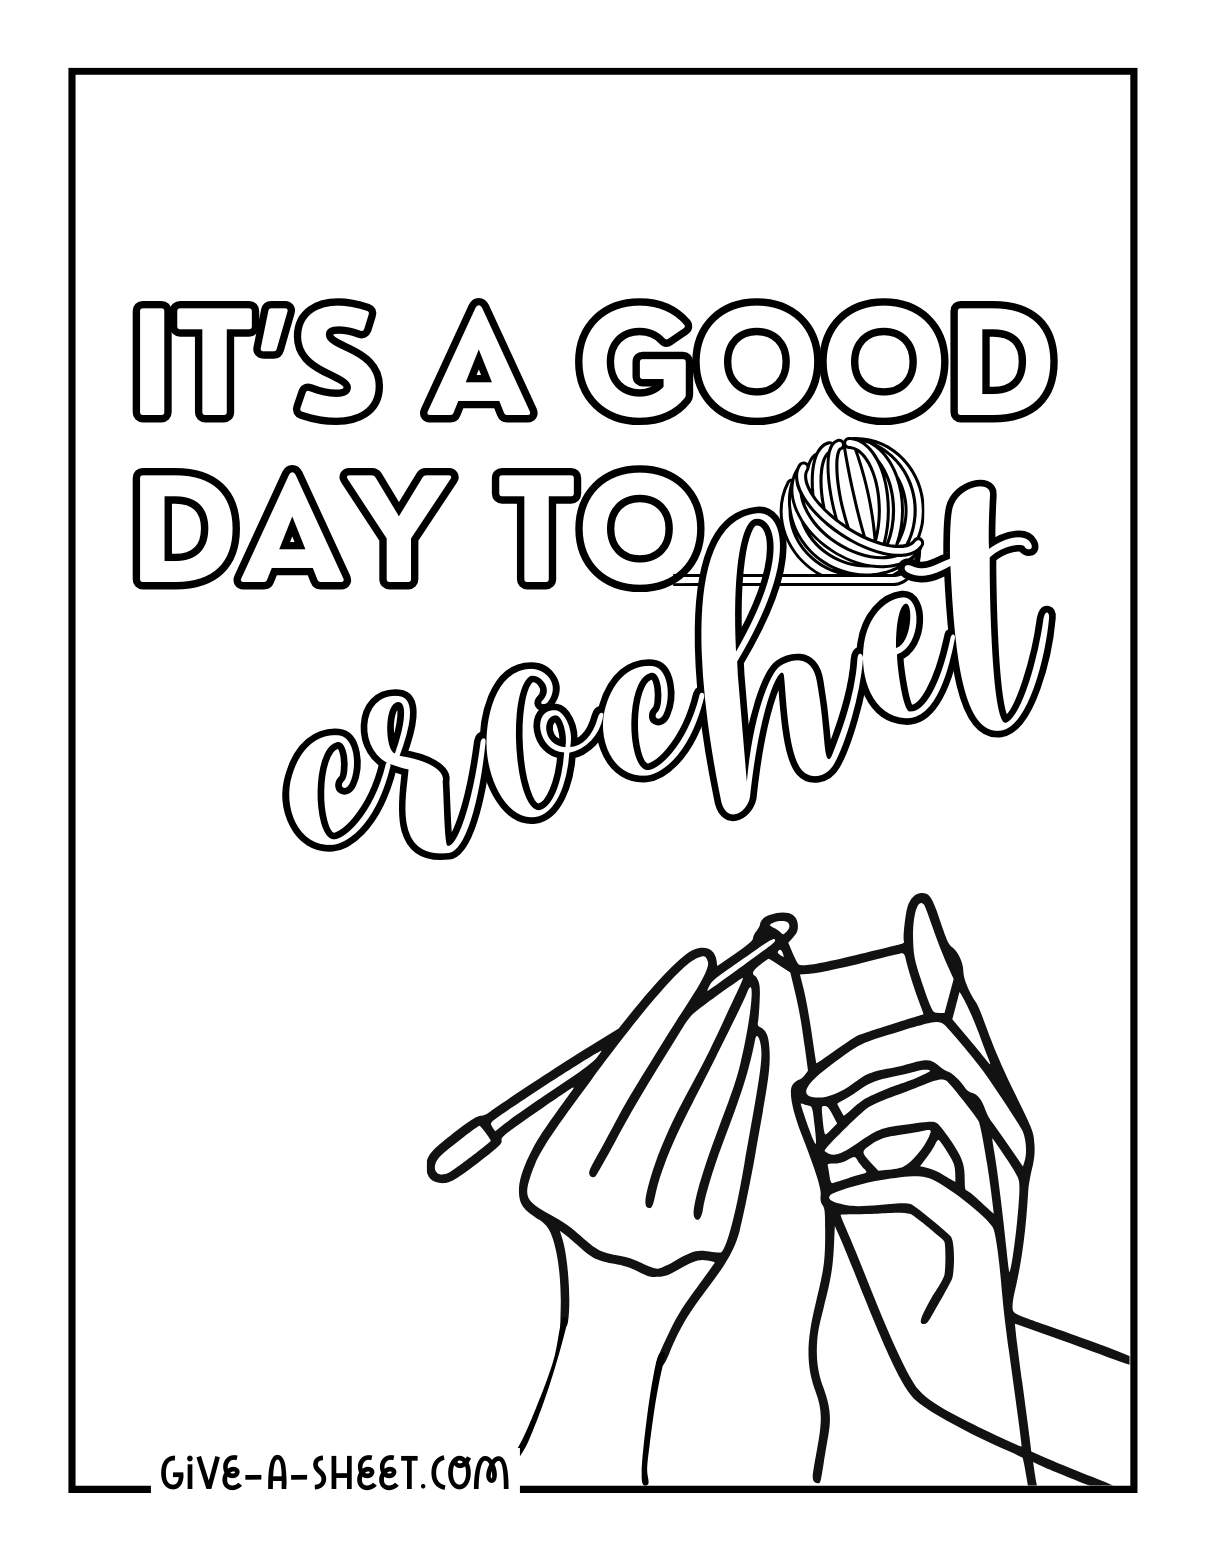 Crochet needlework coloring page.